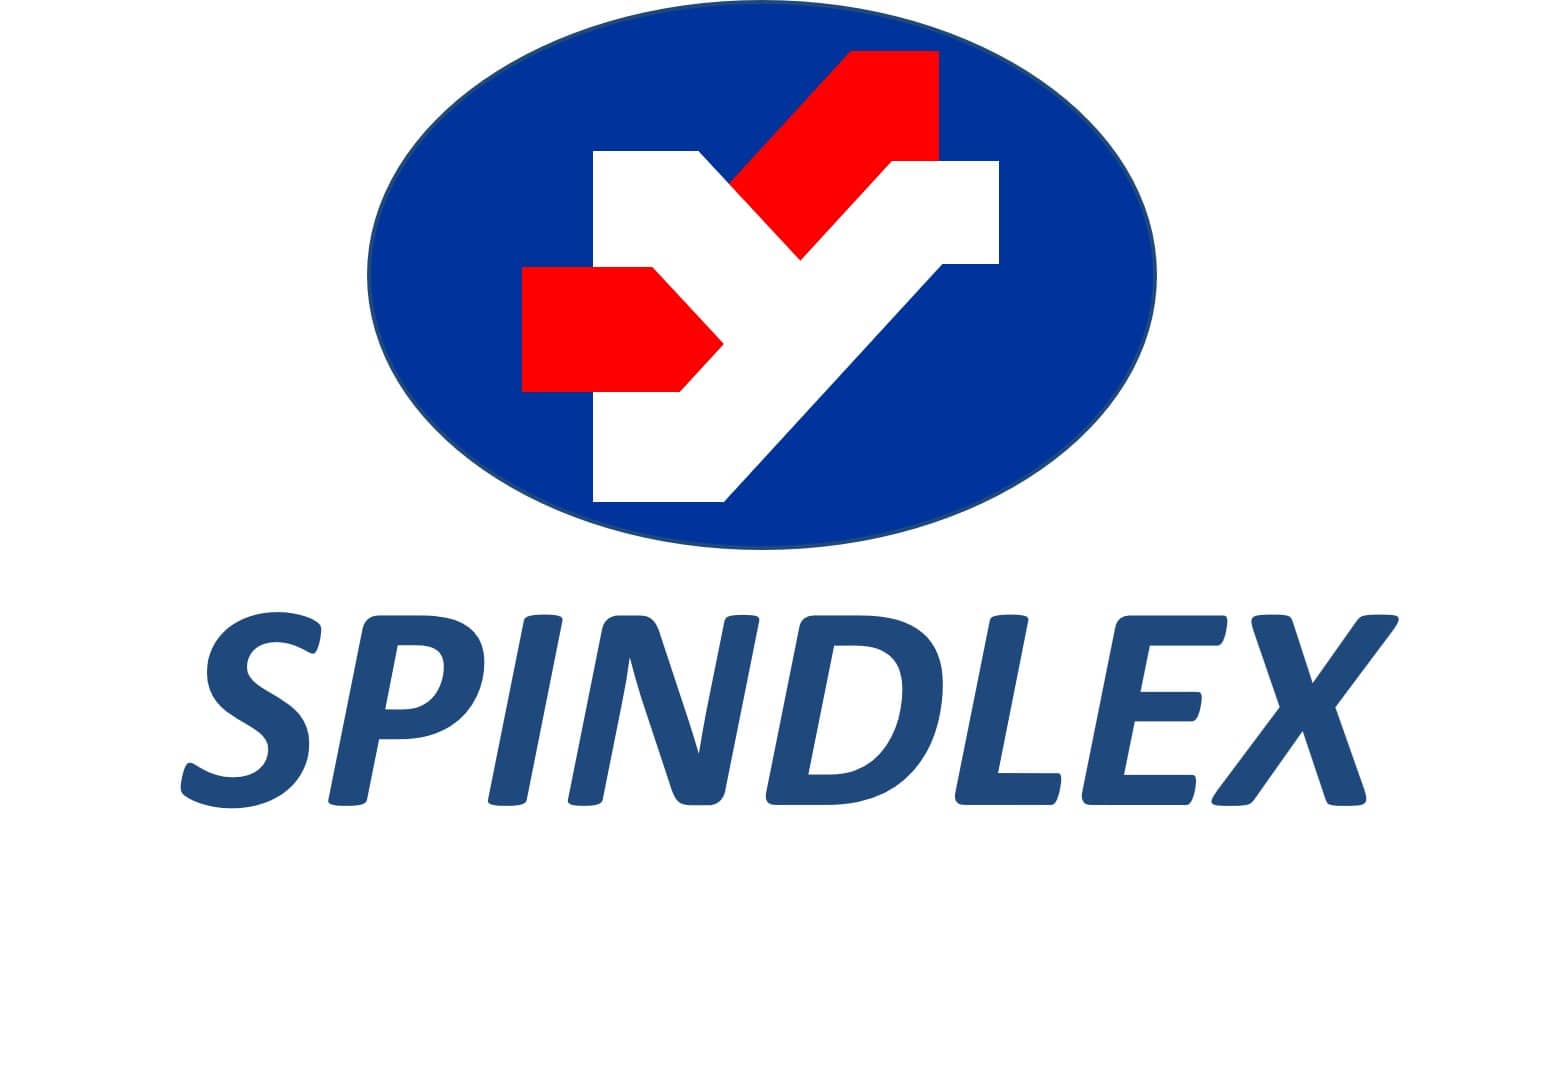 About|SPINDLEX TECHNOLOGIES CO., LTD.